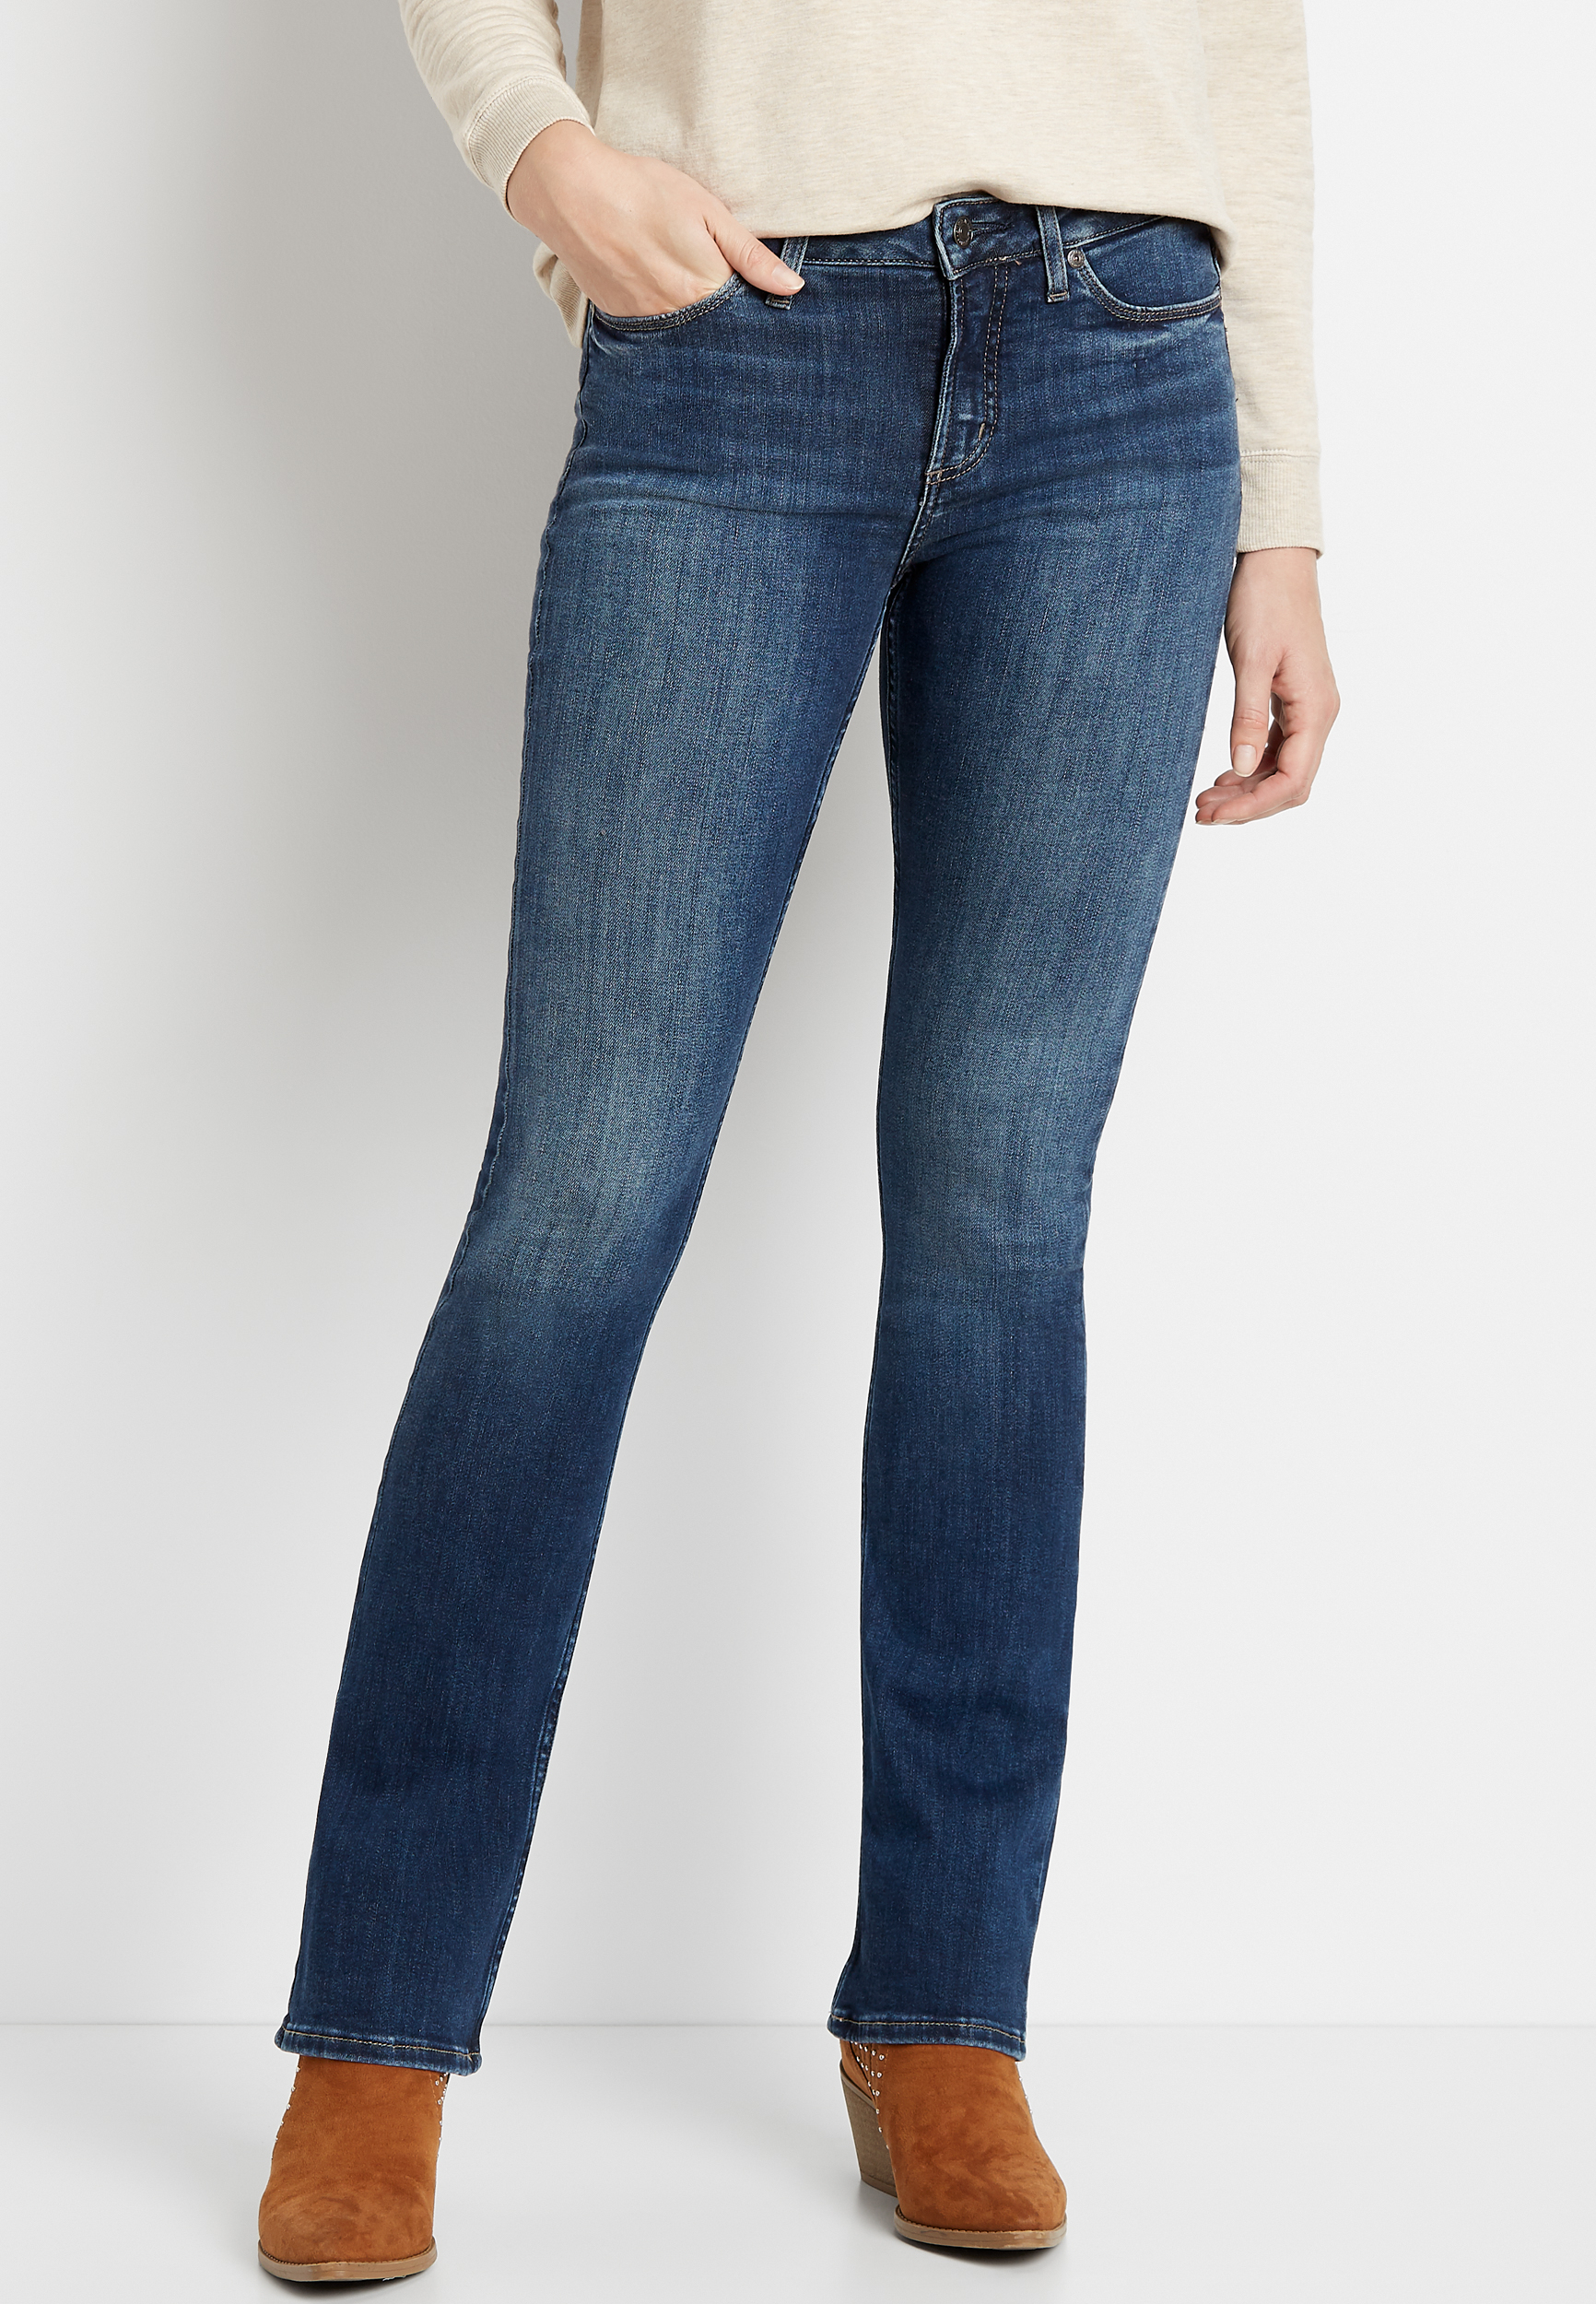 size 28 womens jeans